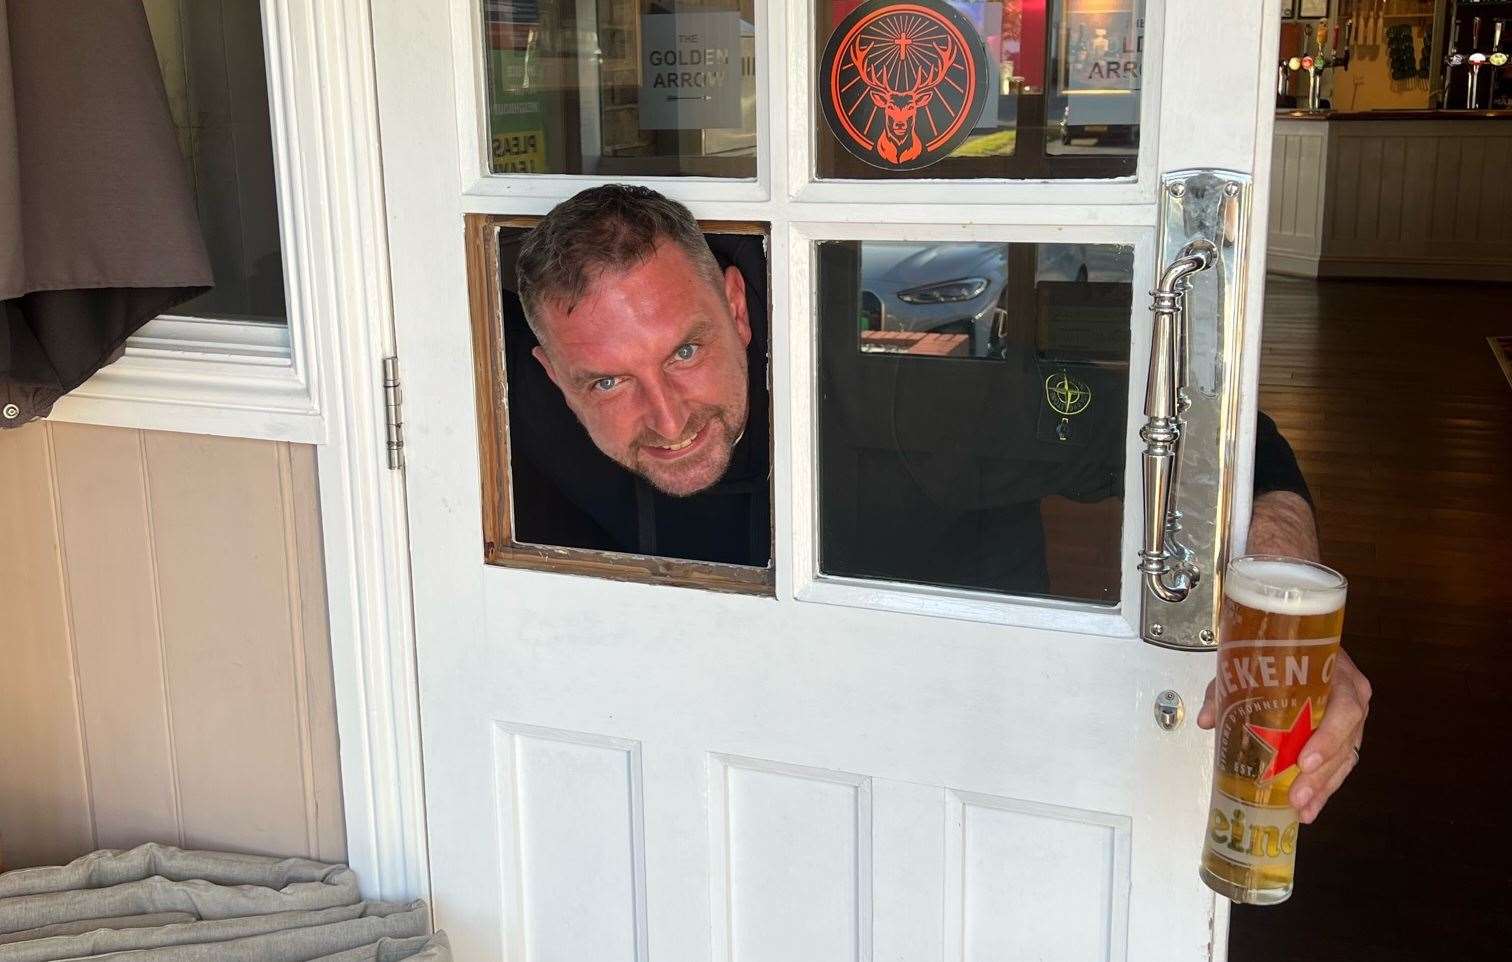 Stewart Davey had to pay to replace the broken window and headbutting through the door while pulling a prank with staff